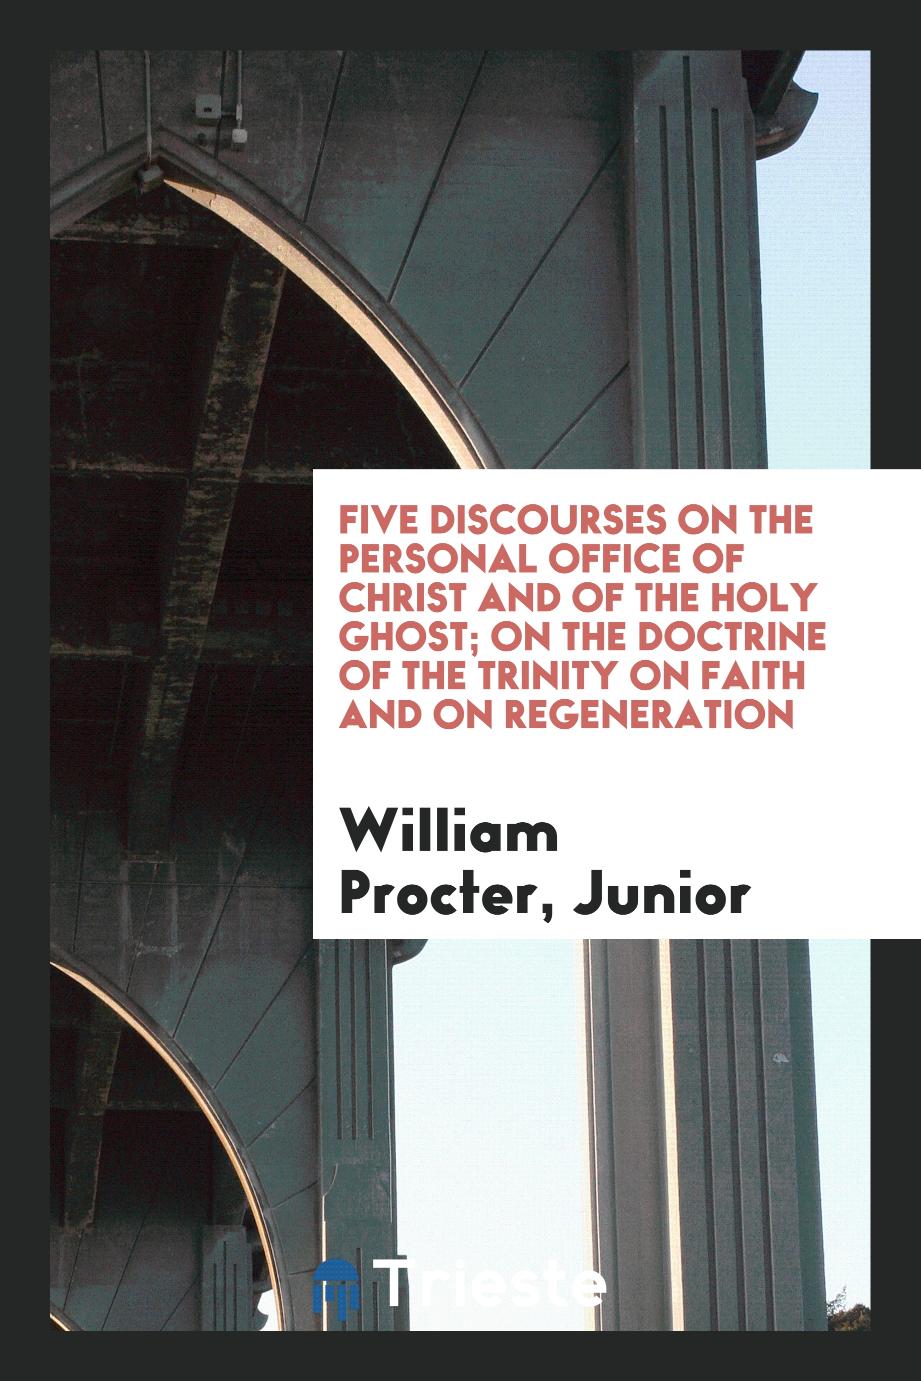 Five Discourses on the Personal Office of Christ and of the Holy Ghost; On the Doctrine of the Trinity on Faith and on Regeneration